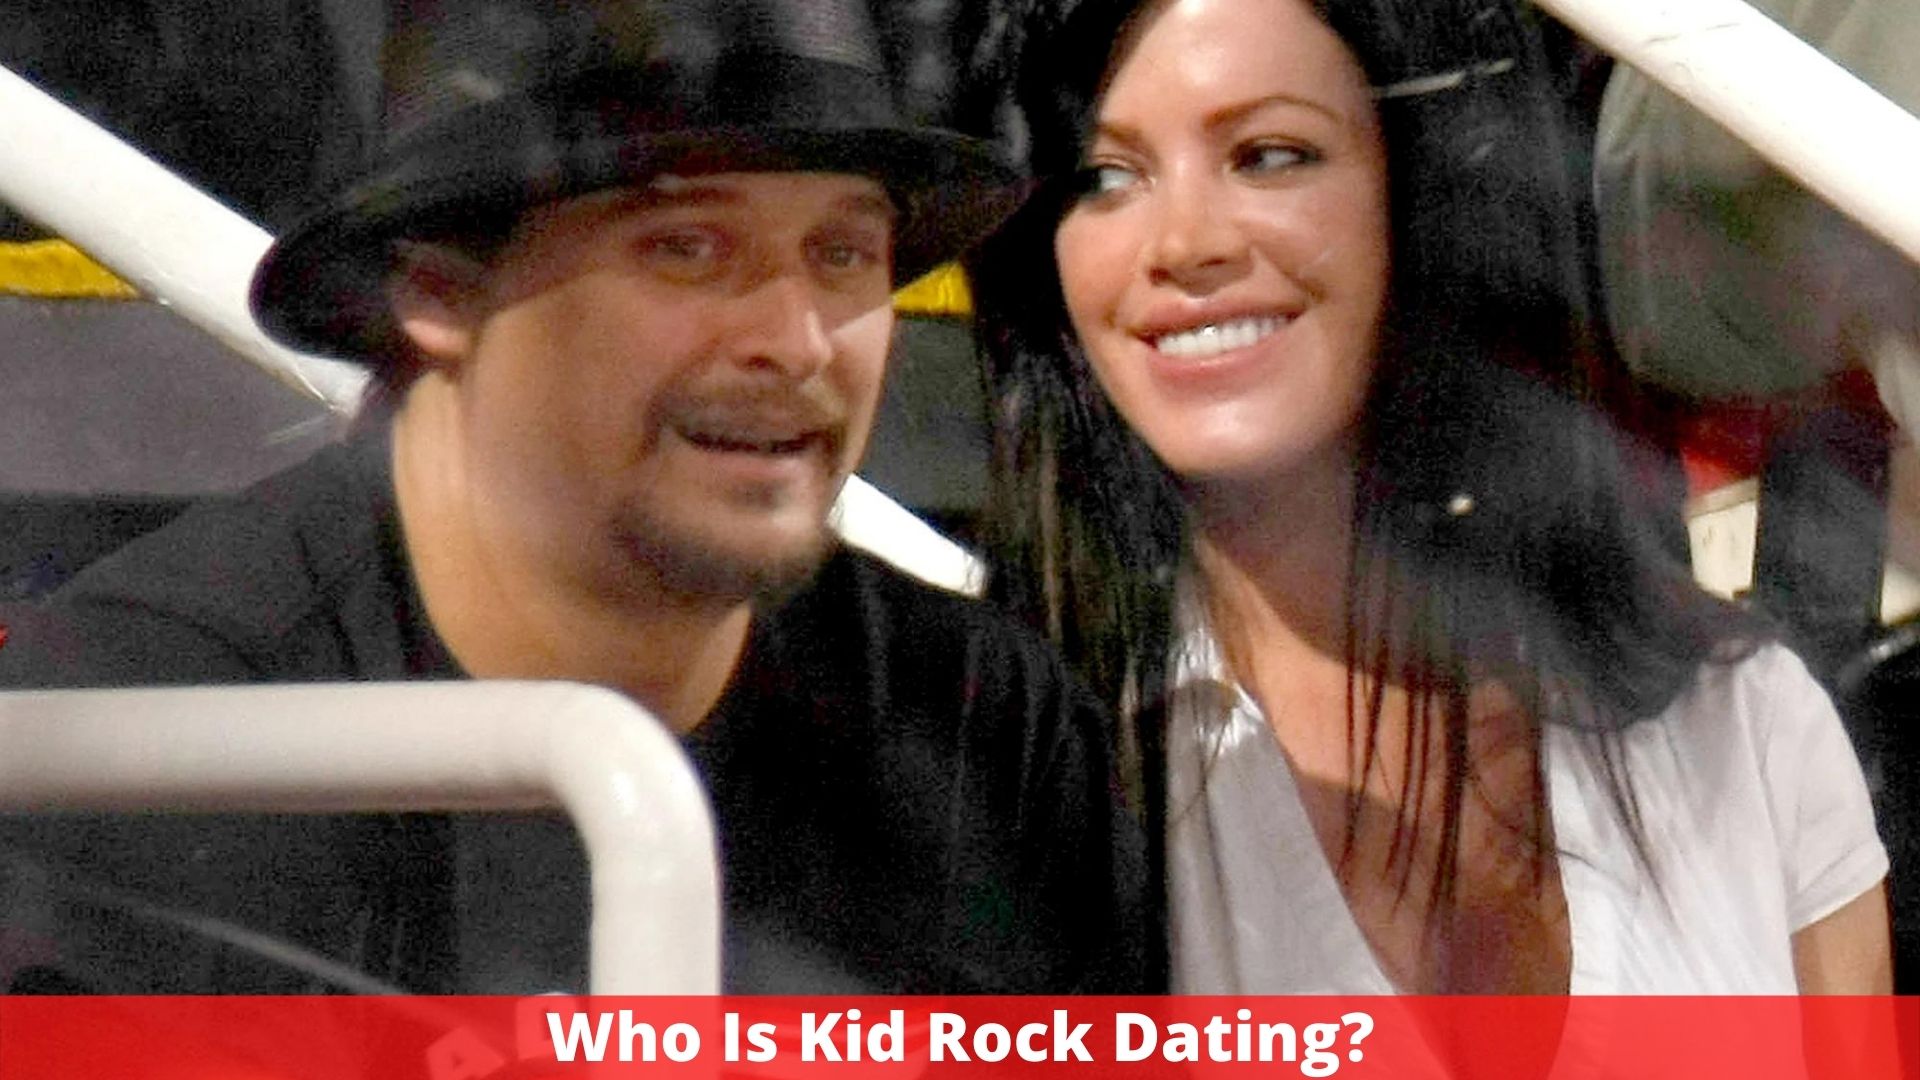 Who Is Kid Rock Dating?